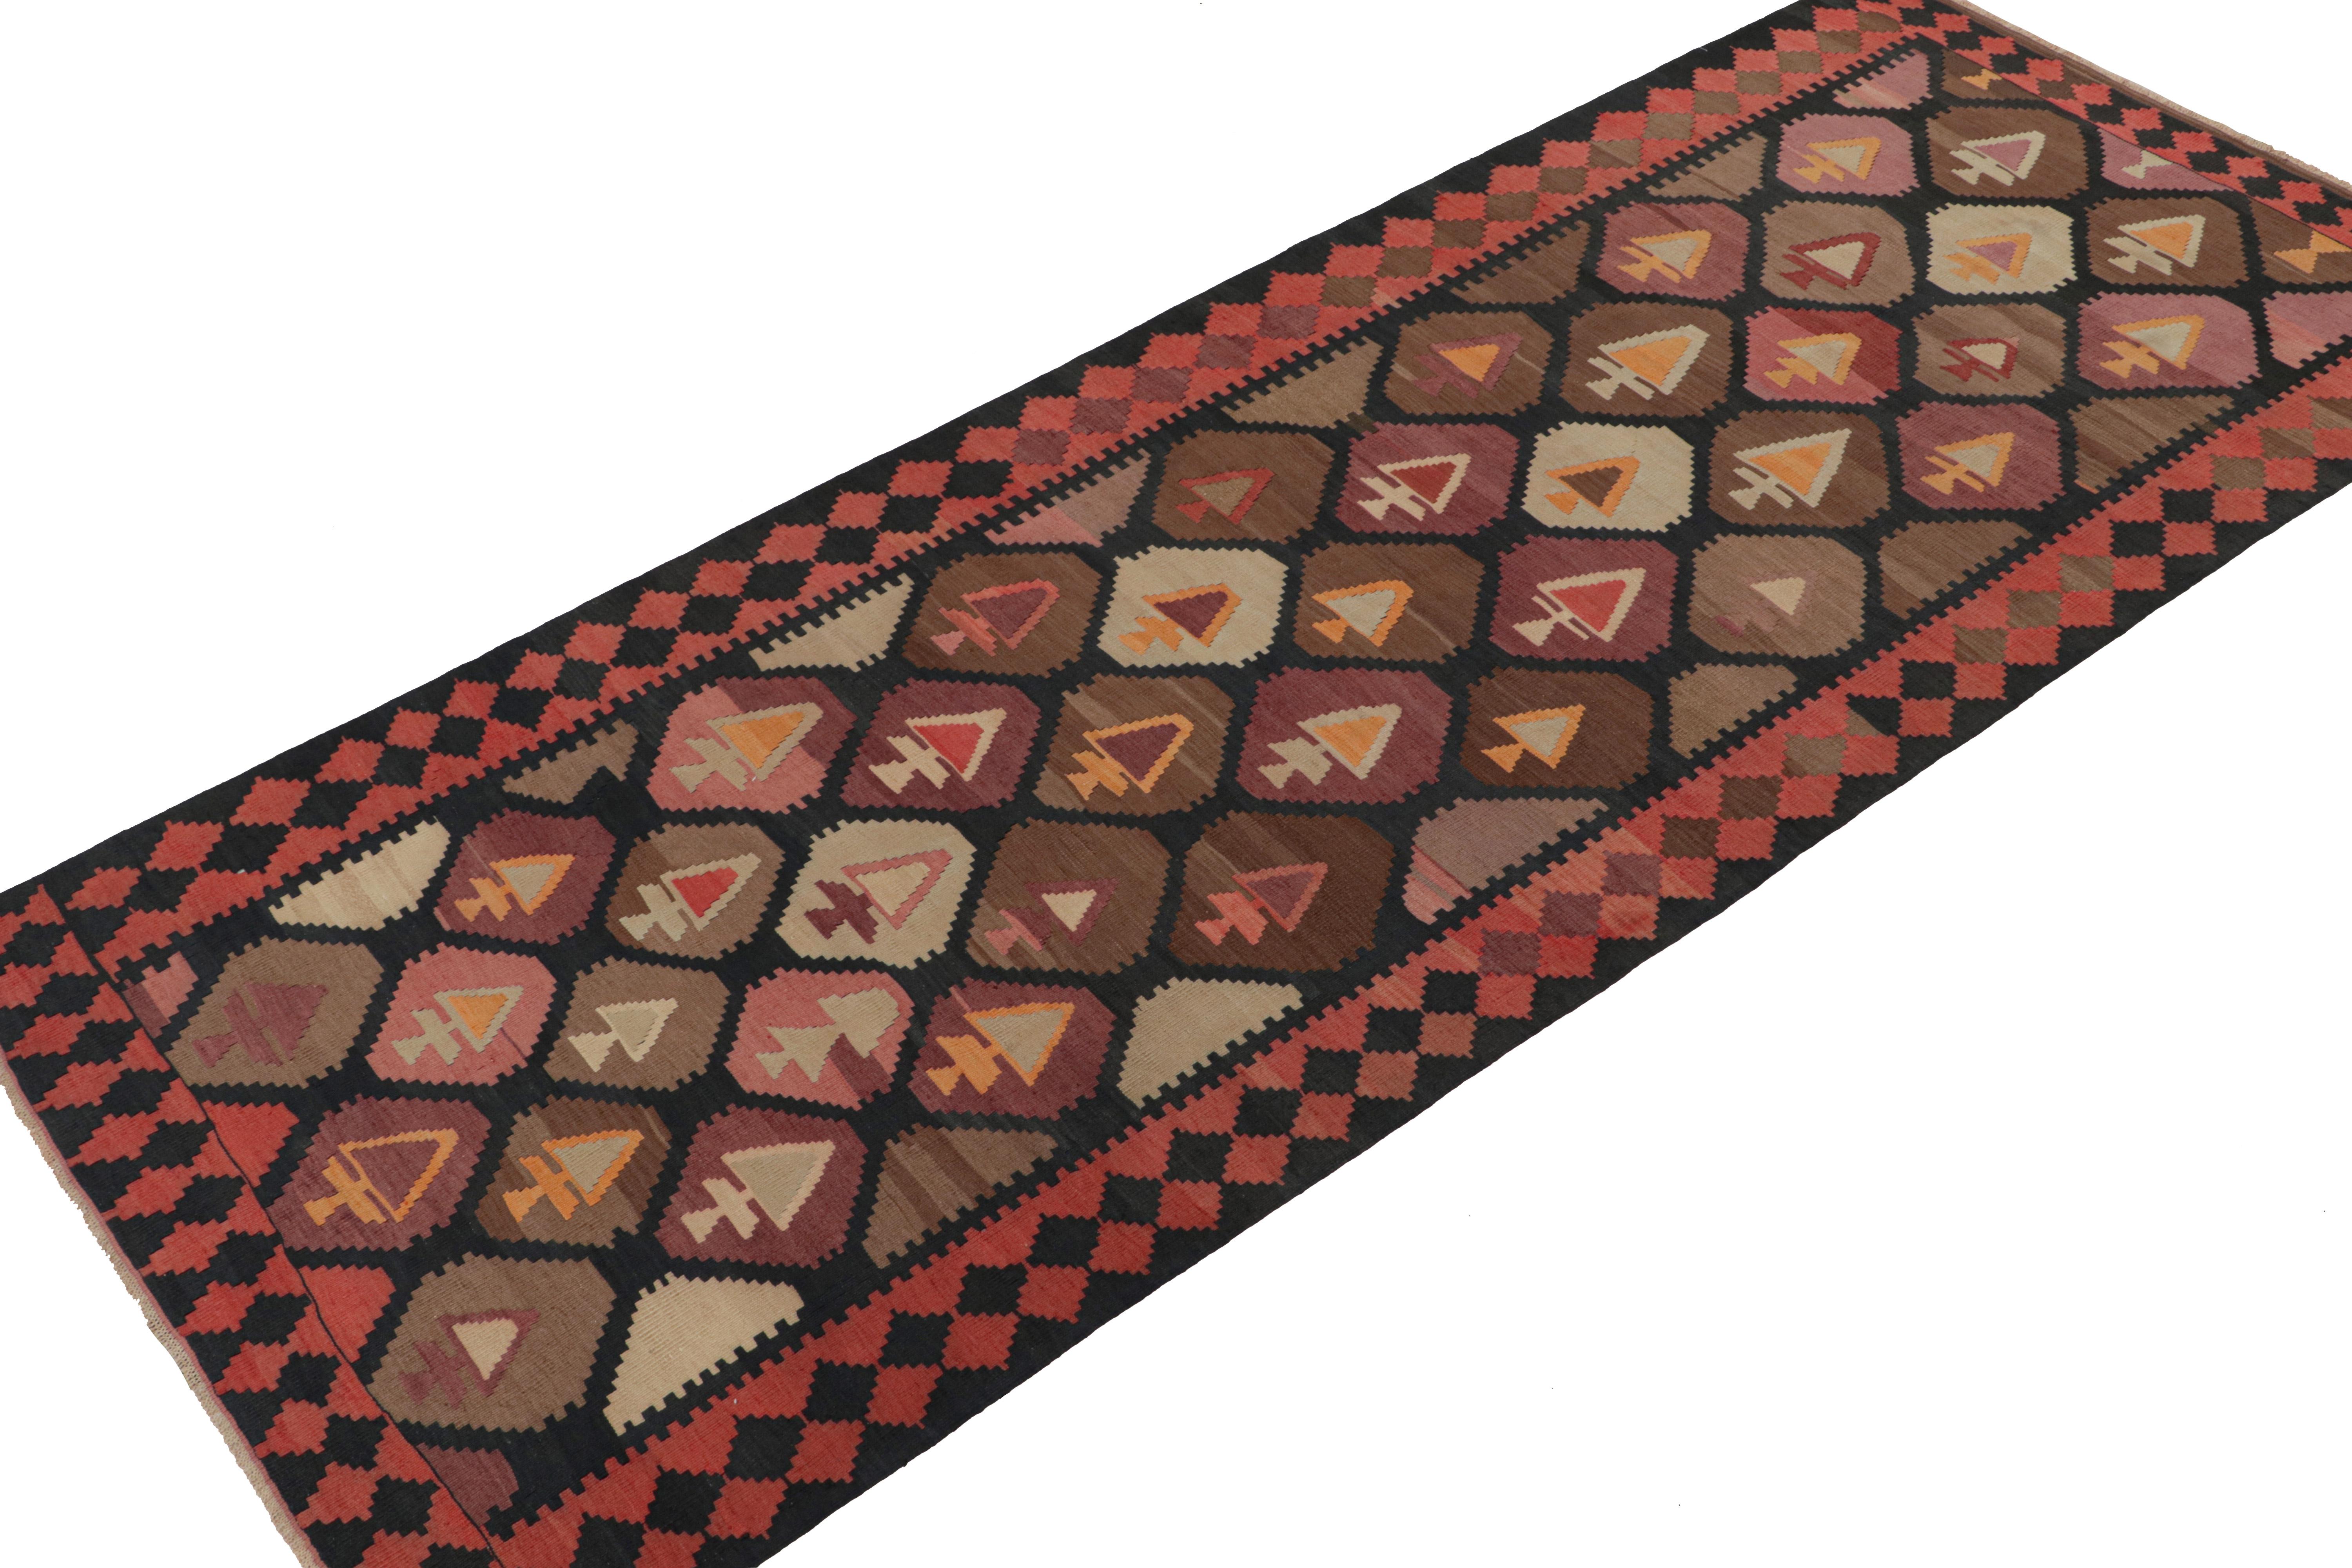 Tribal Vintage Persian Kilim in Red, Black and Brown Geometric Patterns by Rug & Kilim For Sale